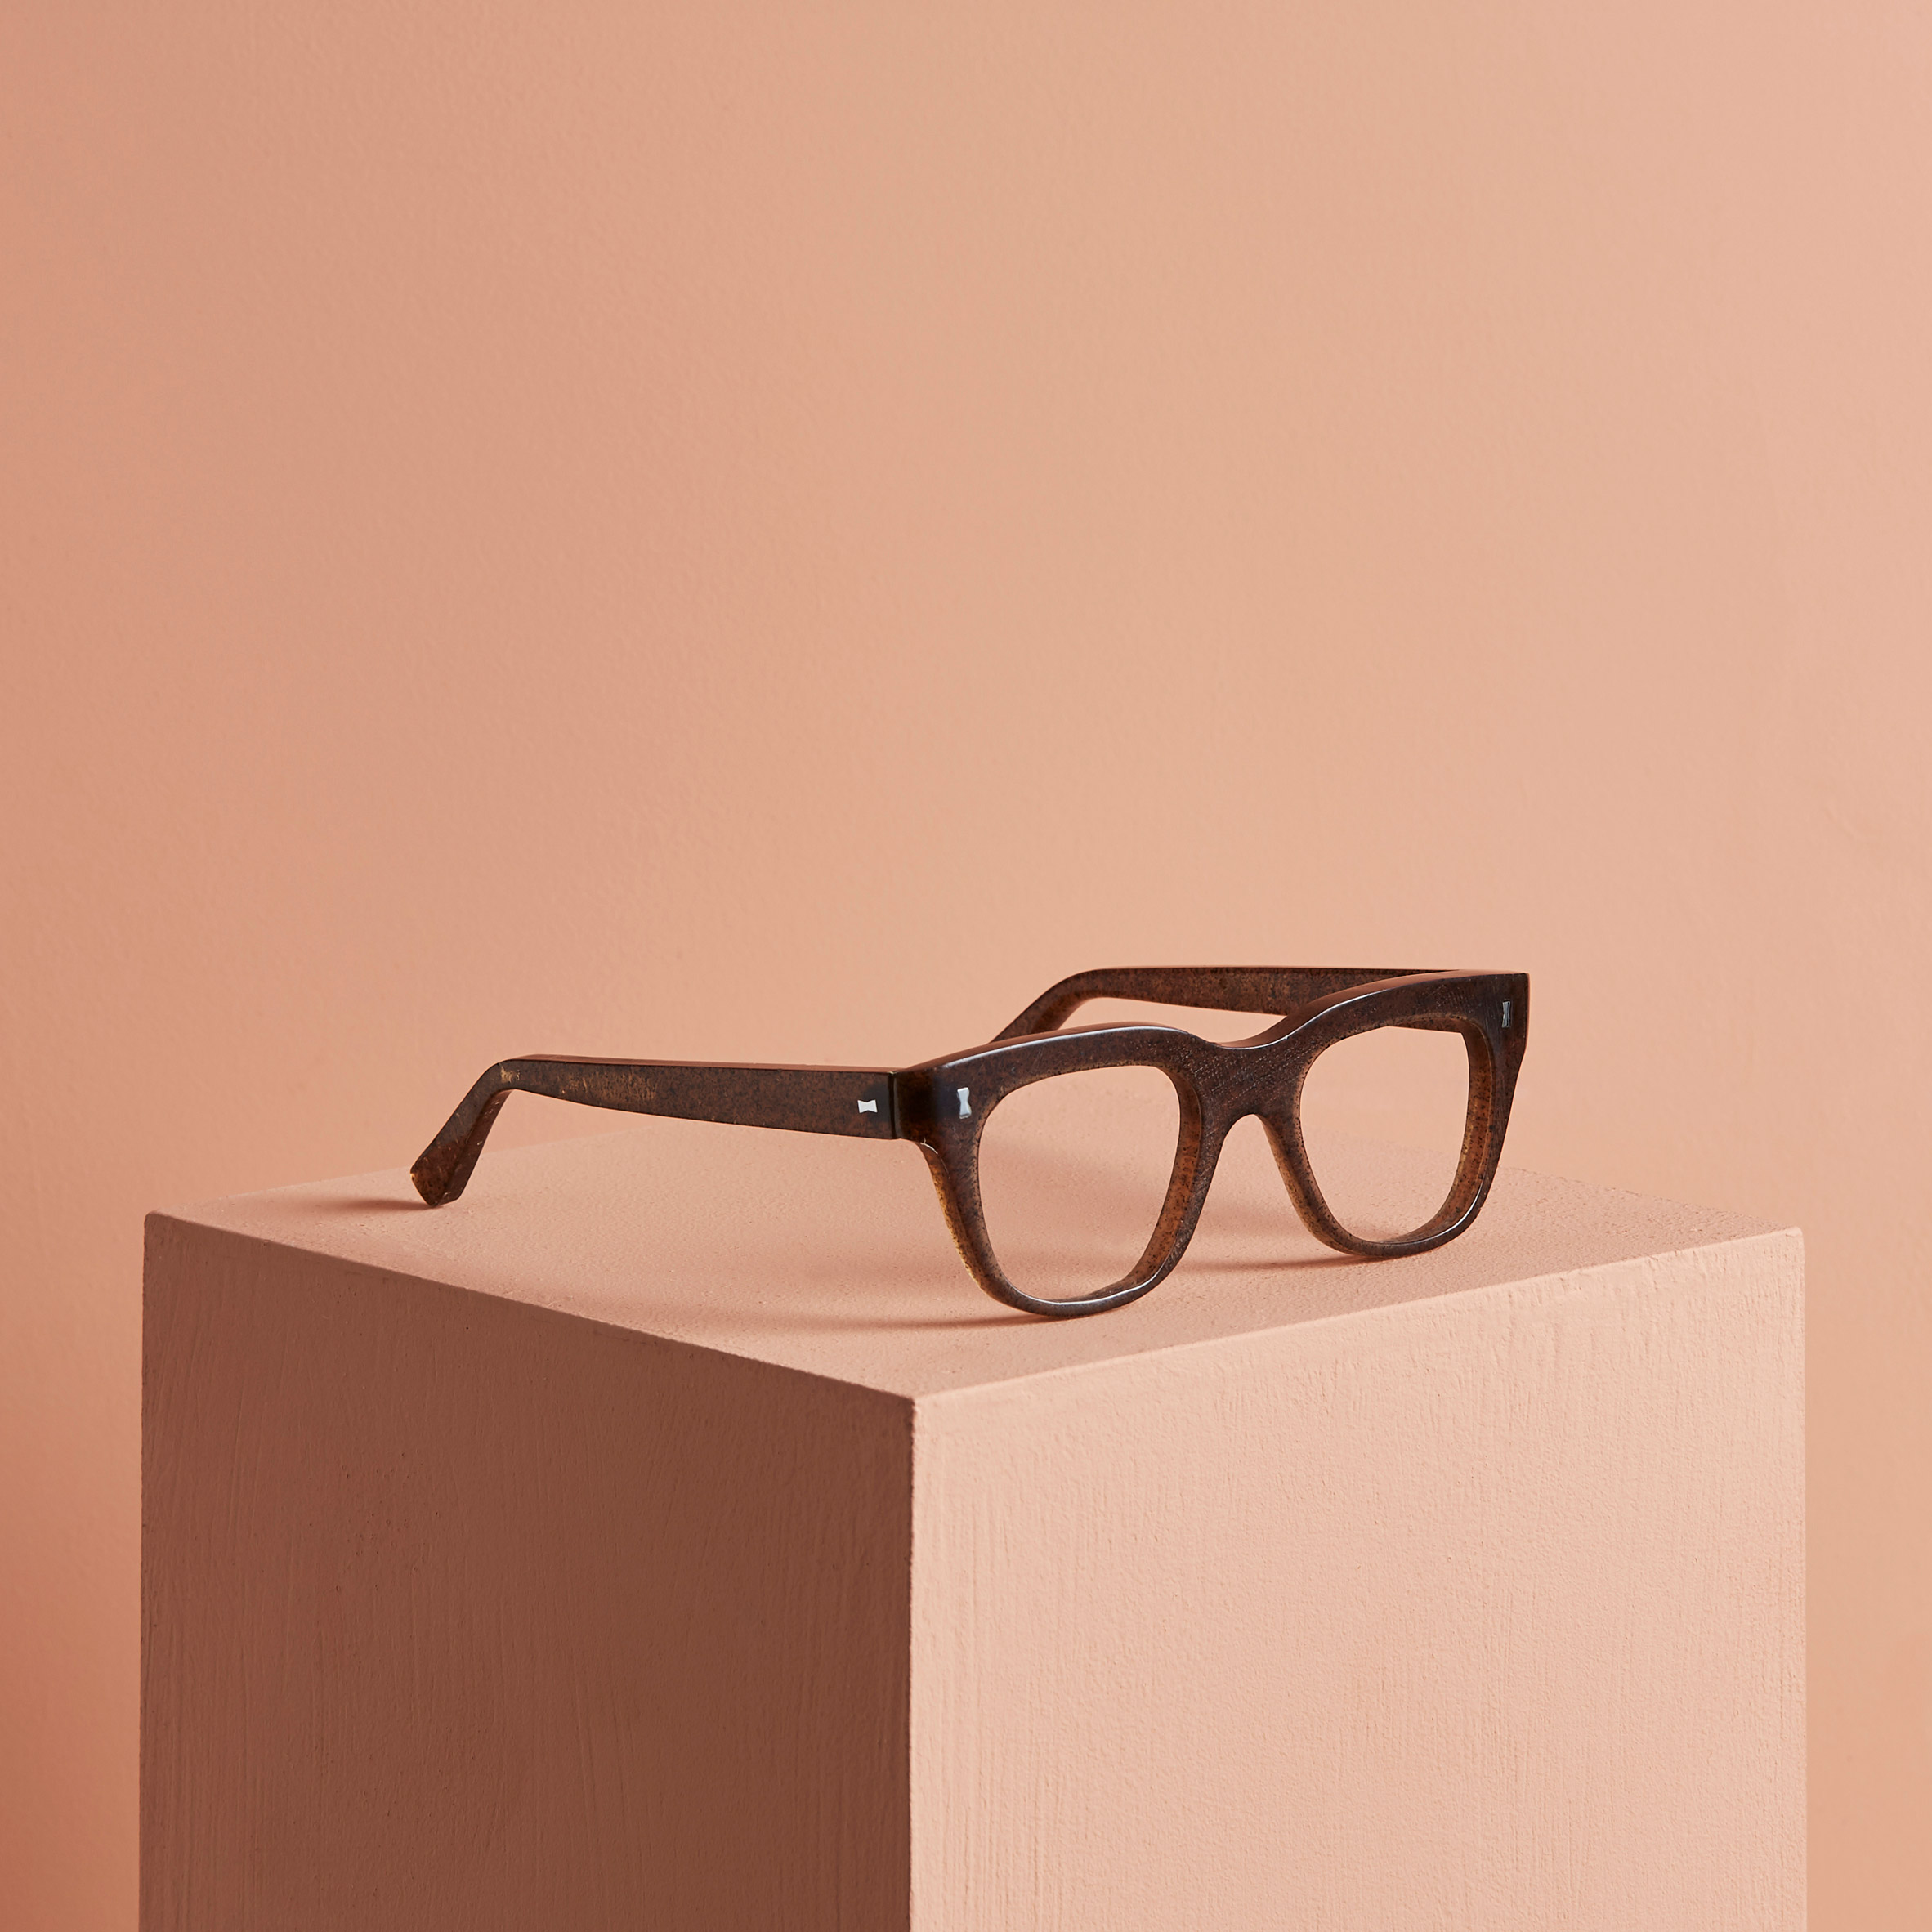 Cubitts makes Redux glasses from waste materials